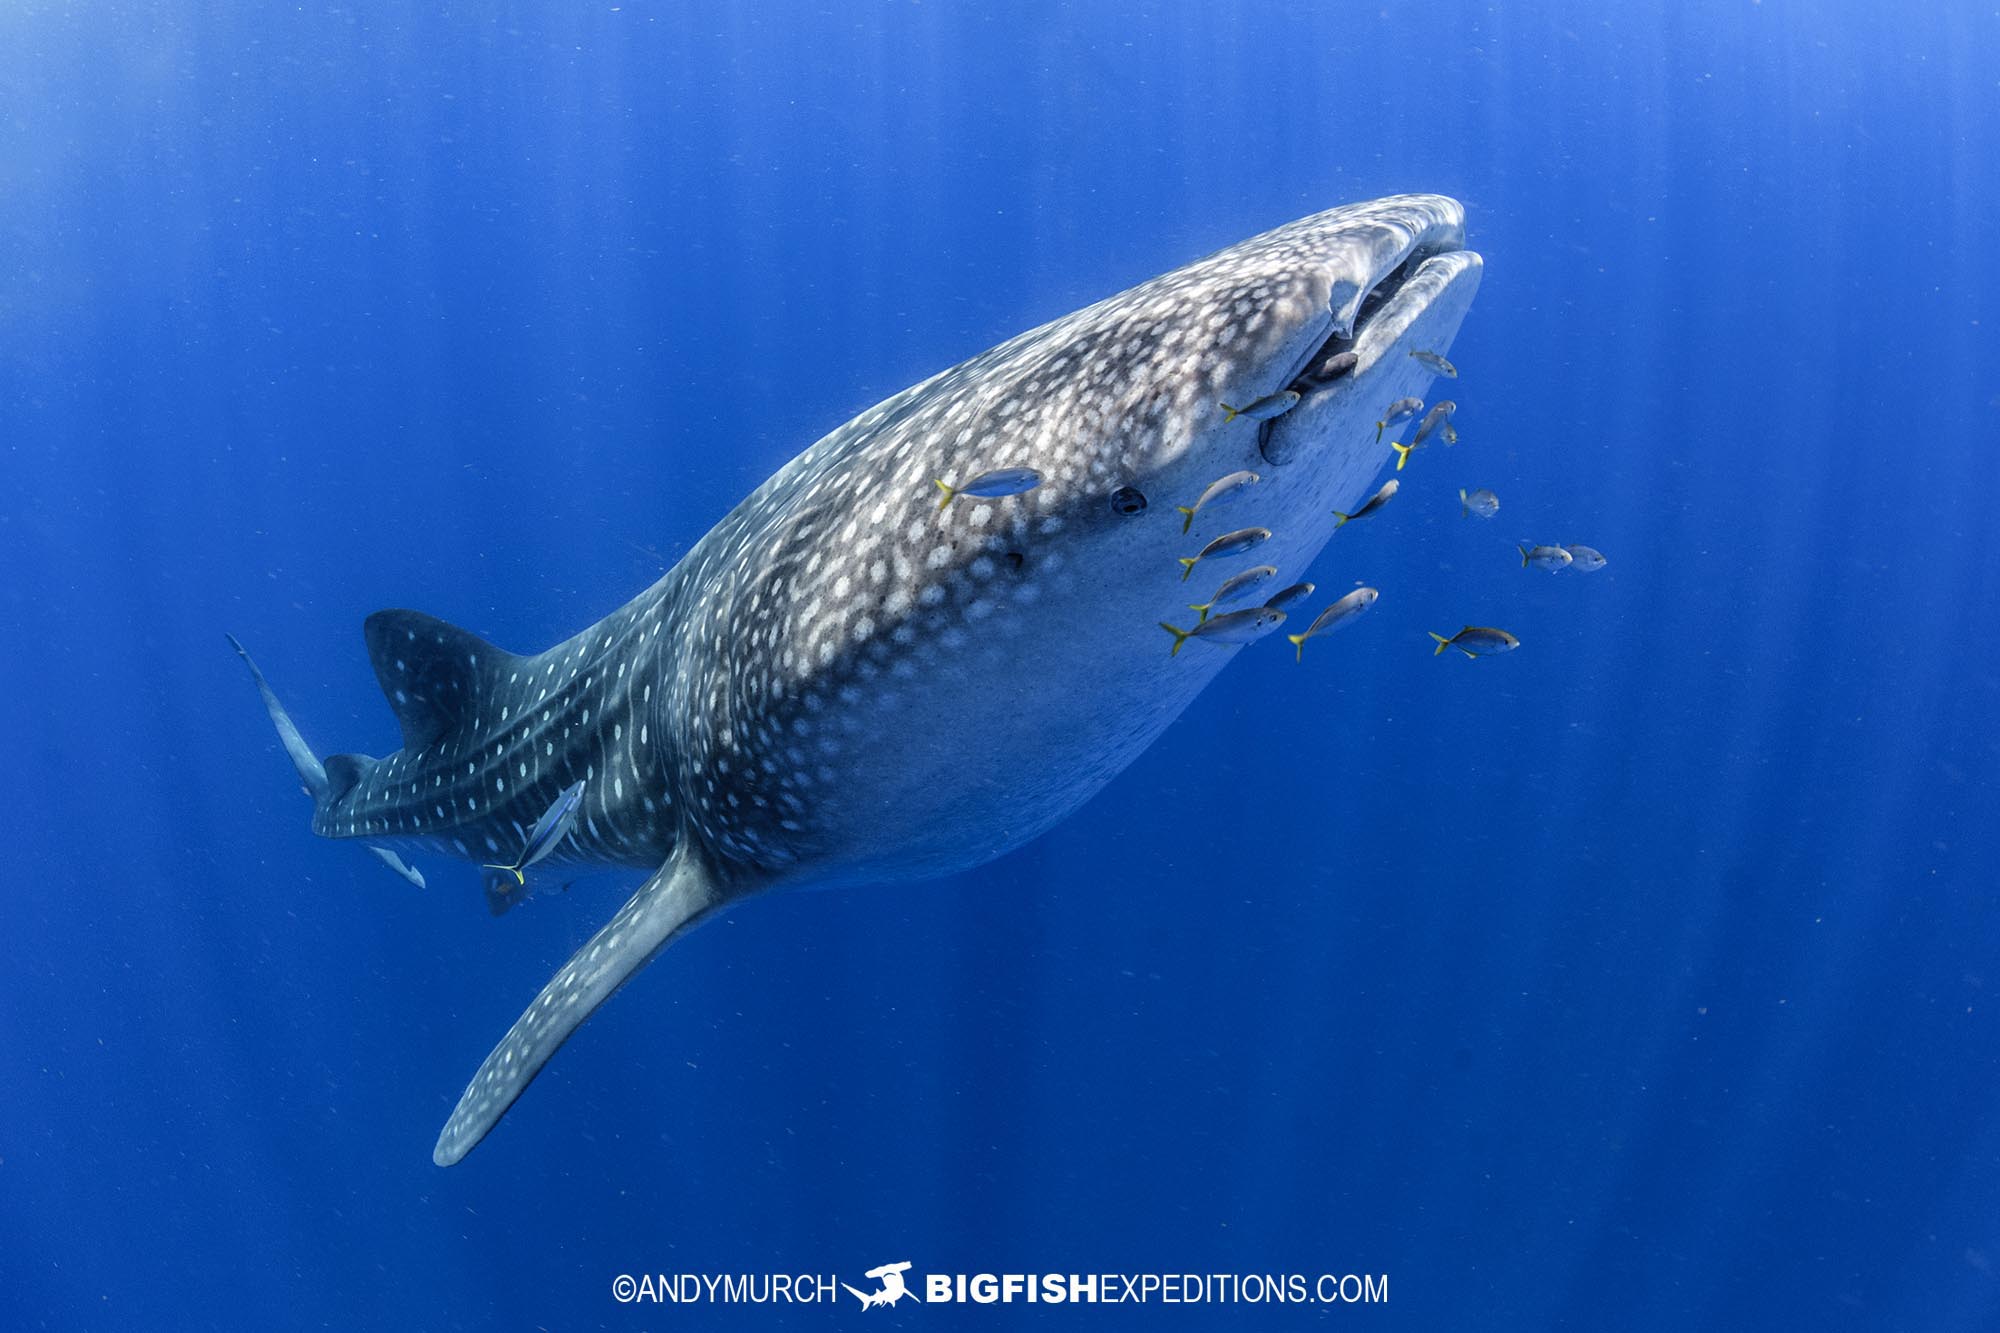 Swimming with Whale Sharks near Cancun, Mexico.